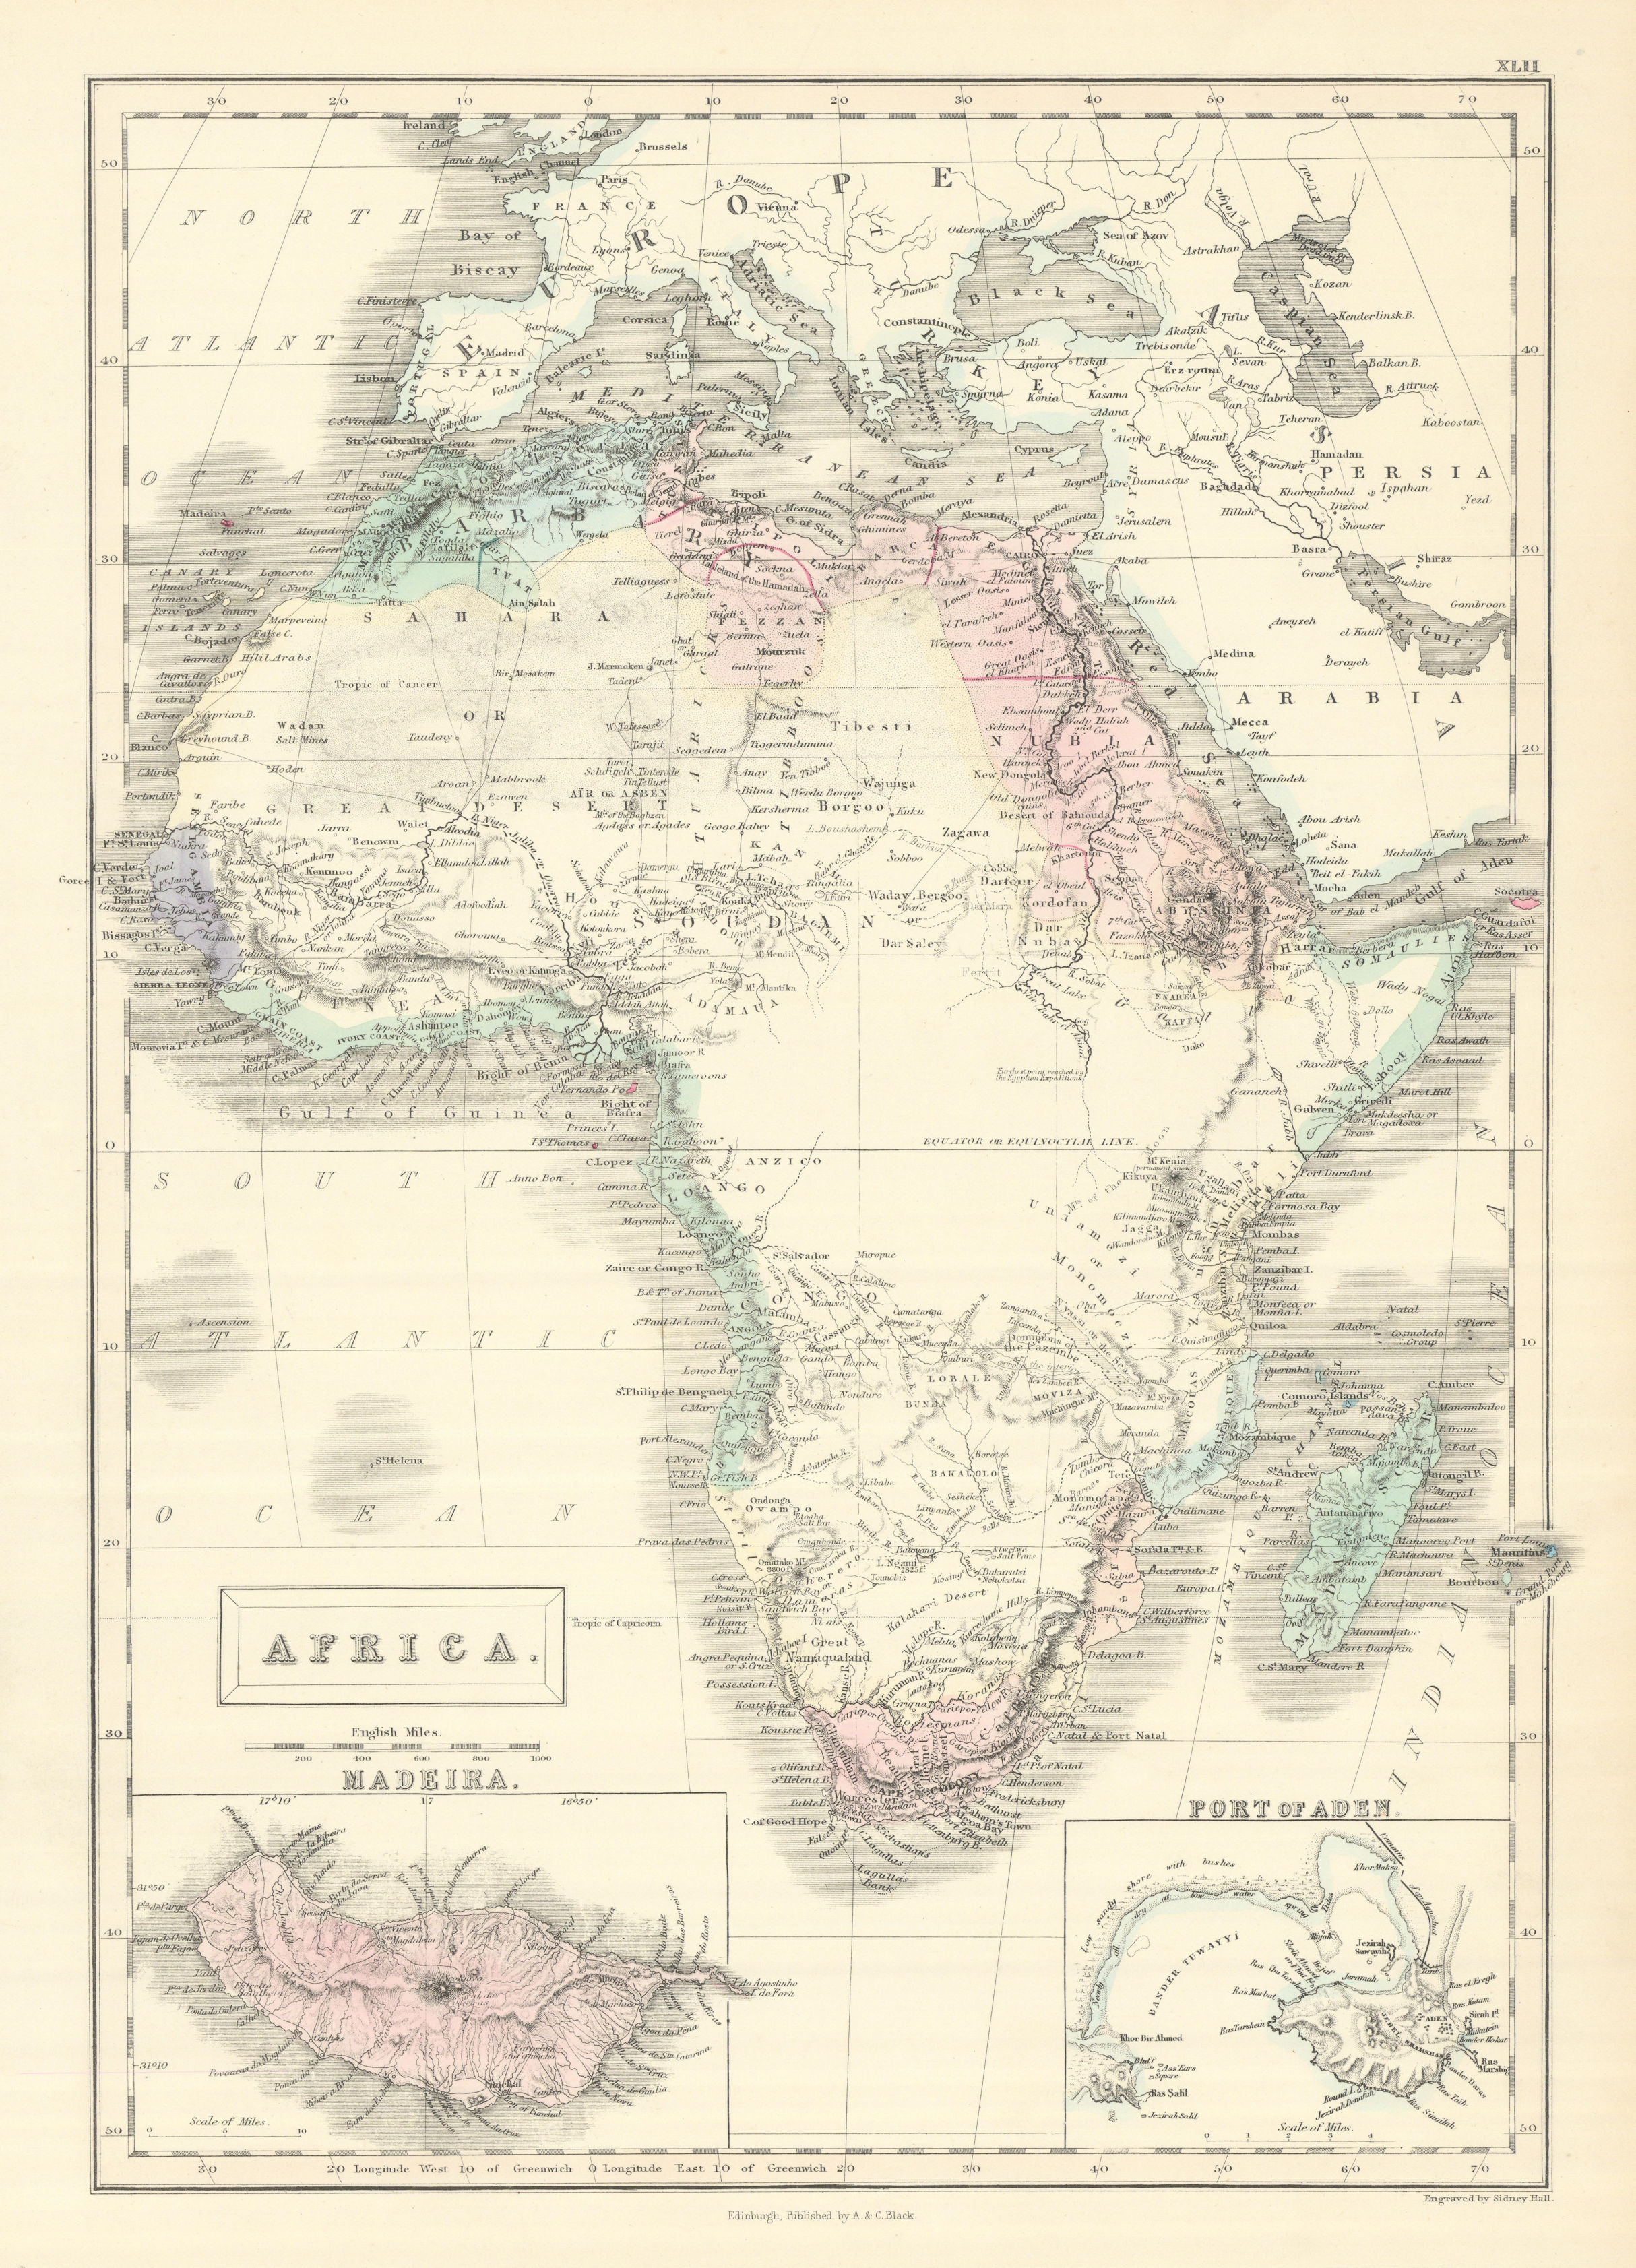 Associate Product Early colonial Africa. Inset Madeira & Aden. SIDNEY HALL 1854 old antique map